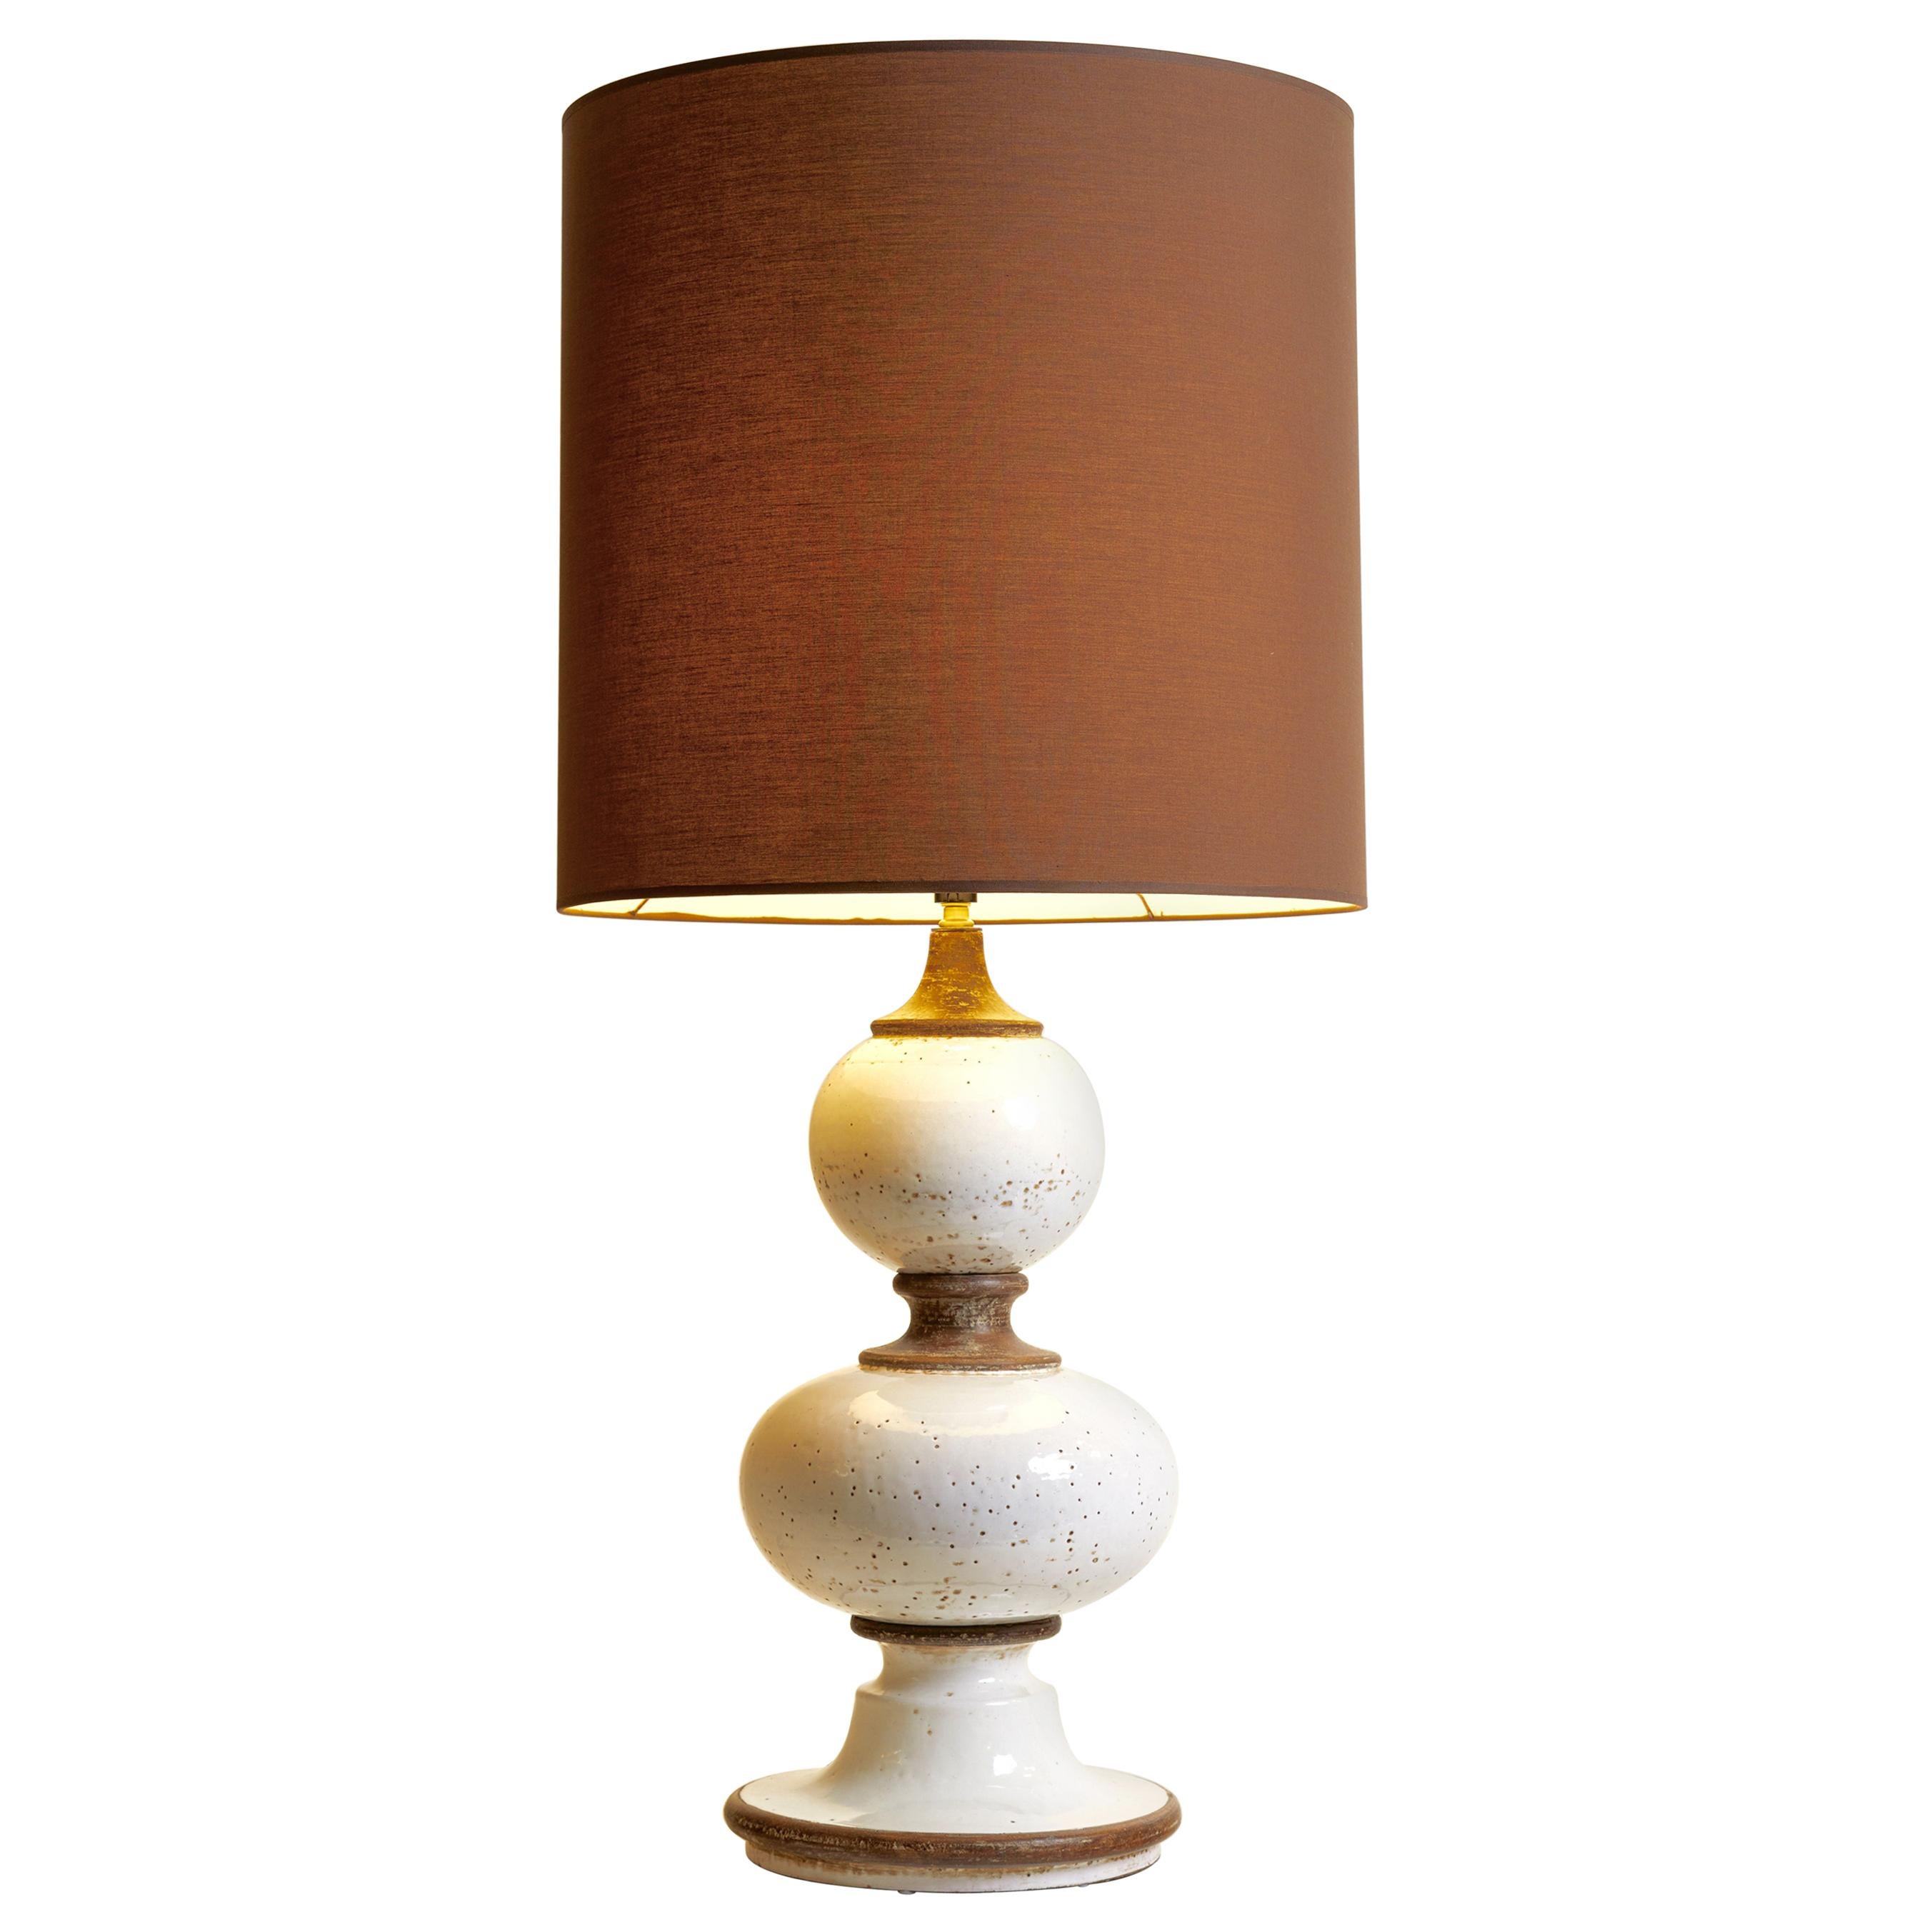 1960s French White Glaze Pottery Lamp with Brown Accents and Custom Lampshade